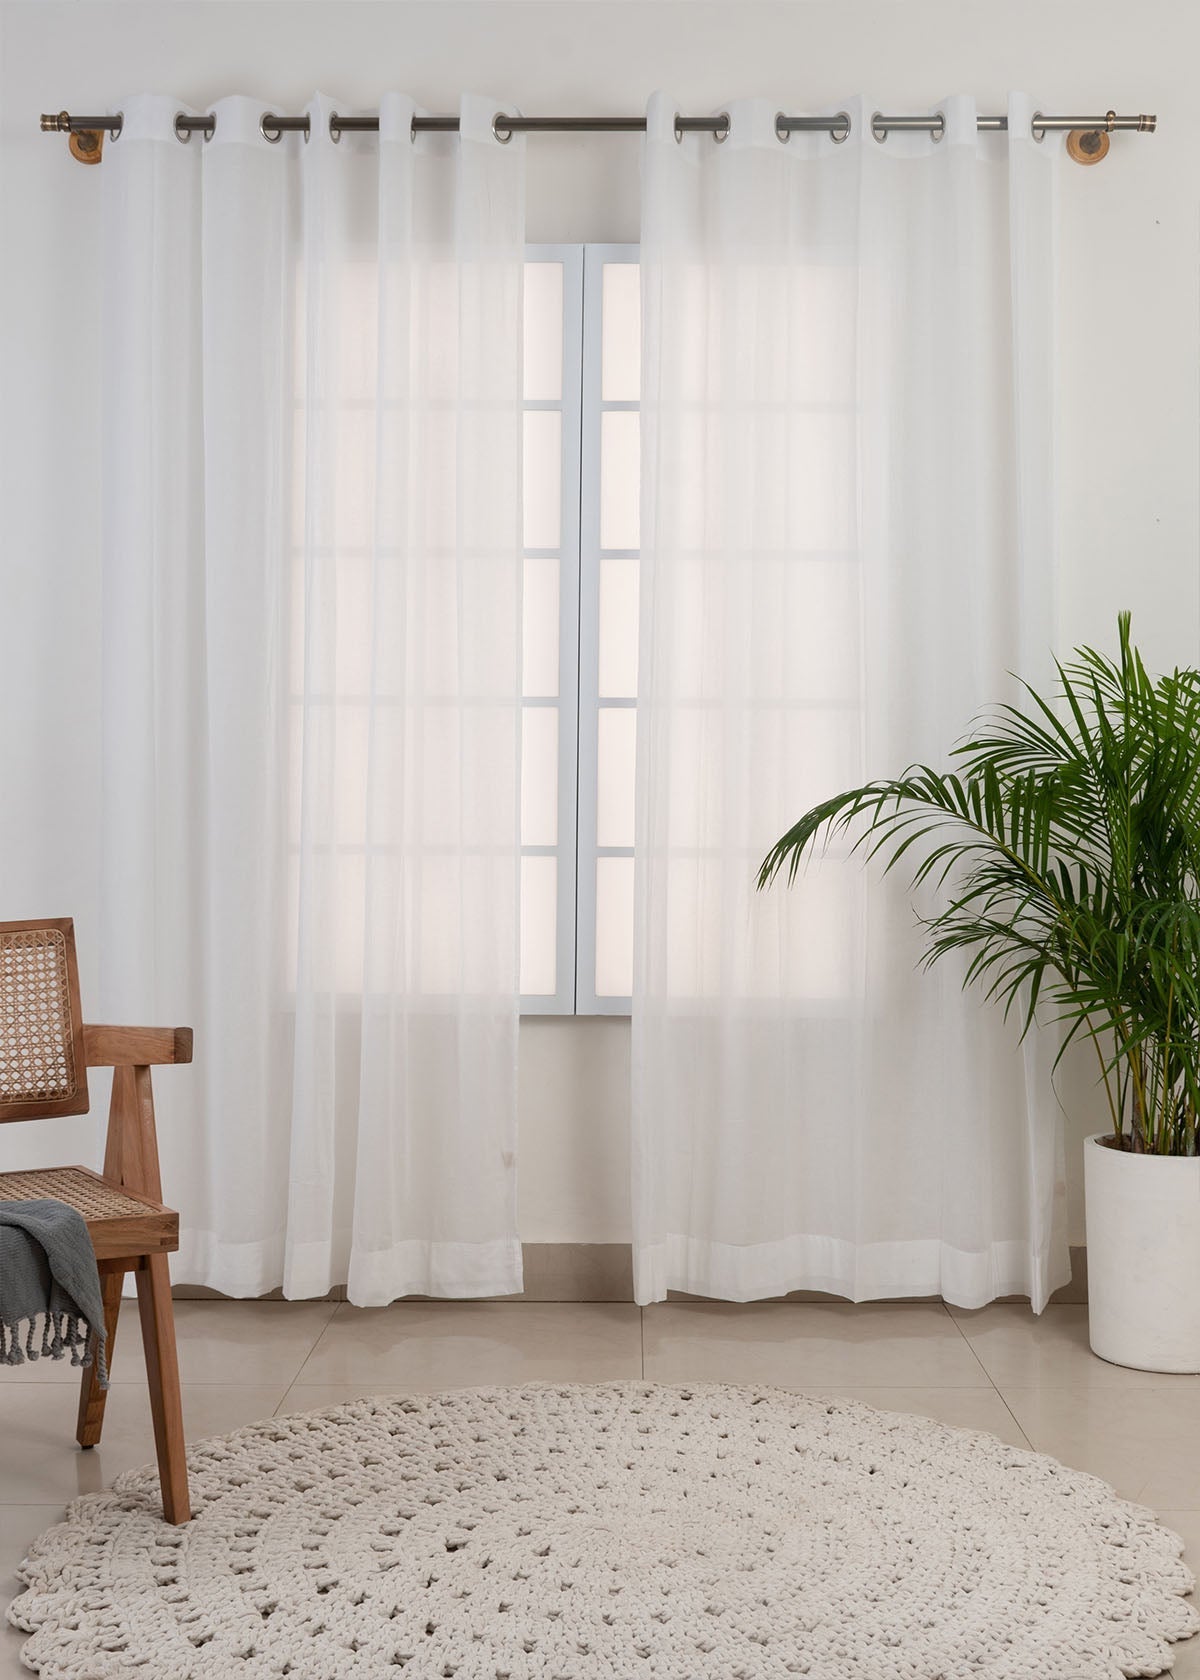 Solid white sheer 100% cotton plain curtain for Living room & bedroom - Light filtering - Pack of 1